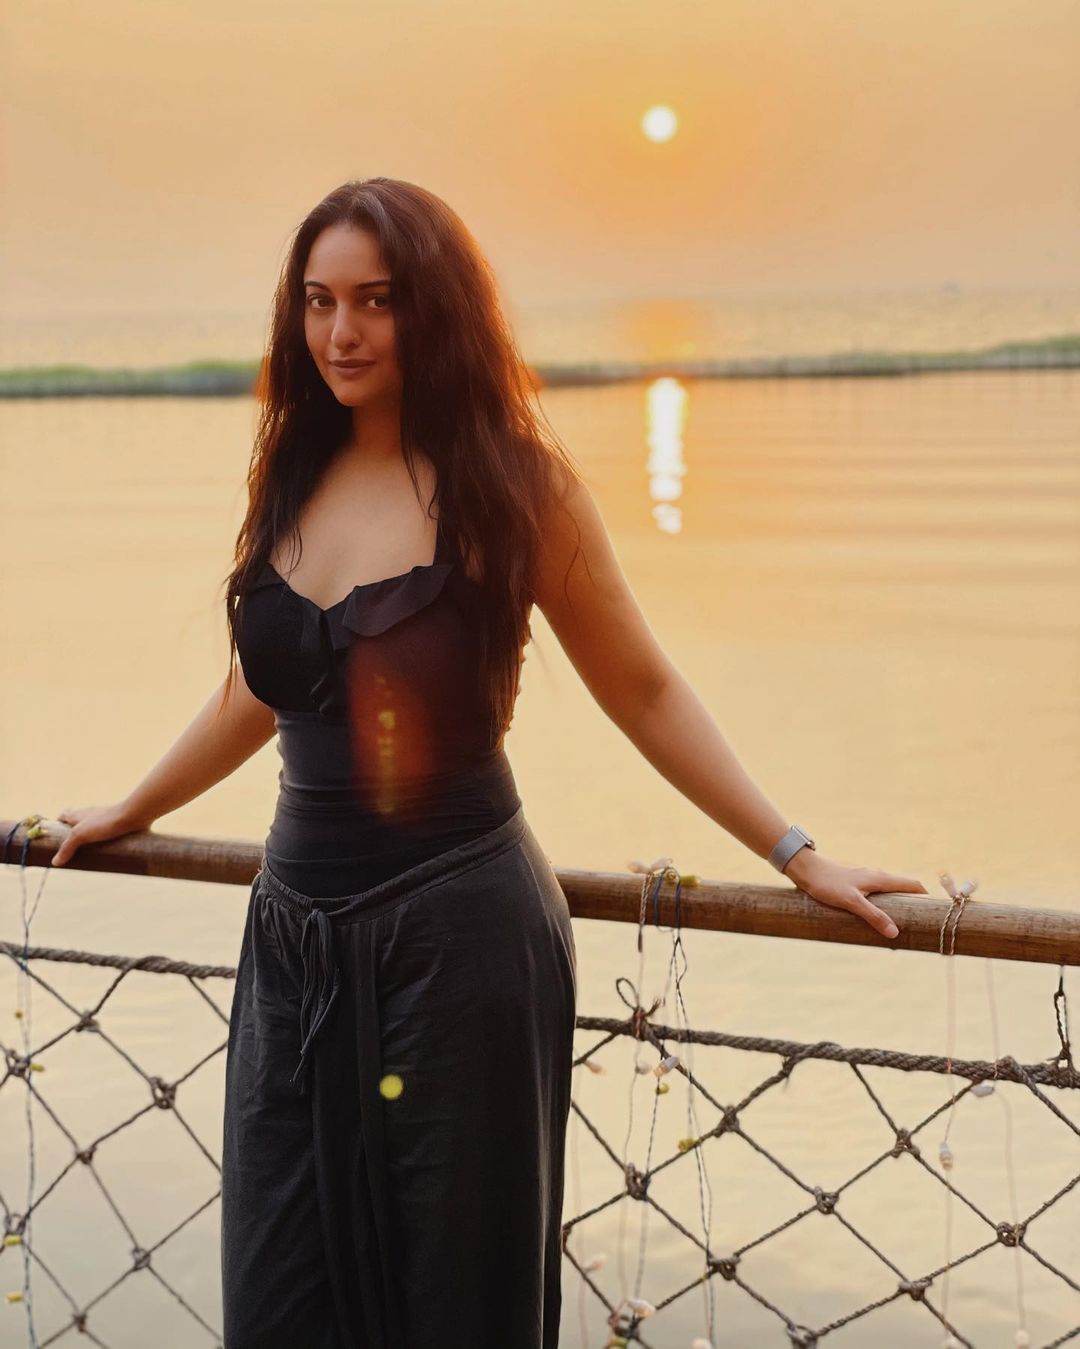 Sonakshi Sinha Expresses Her Love For Mother Earth With An Appreciation Post